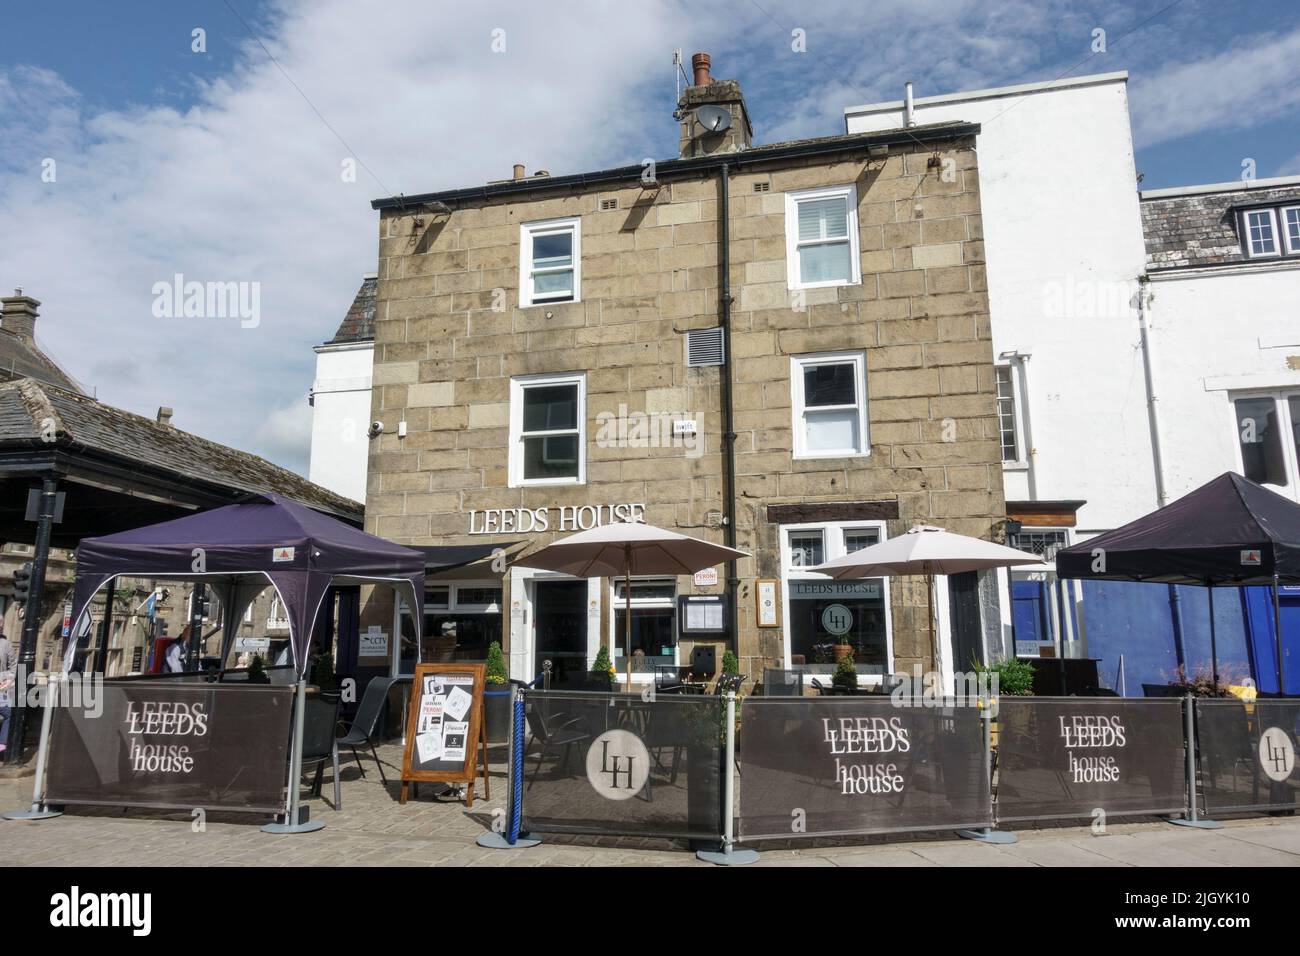 Leeds House Cafe in Market Place, Otley, West Yorkshire, Regno Unito. Foto Stock